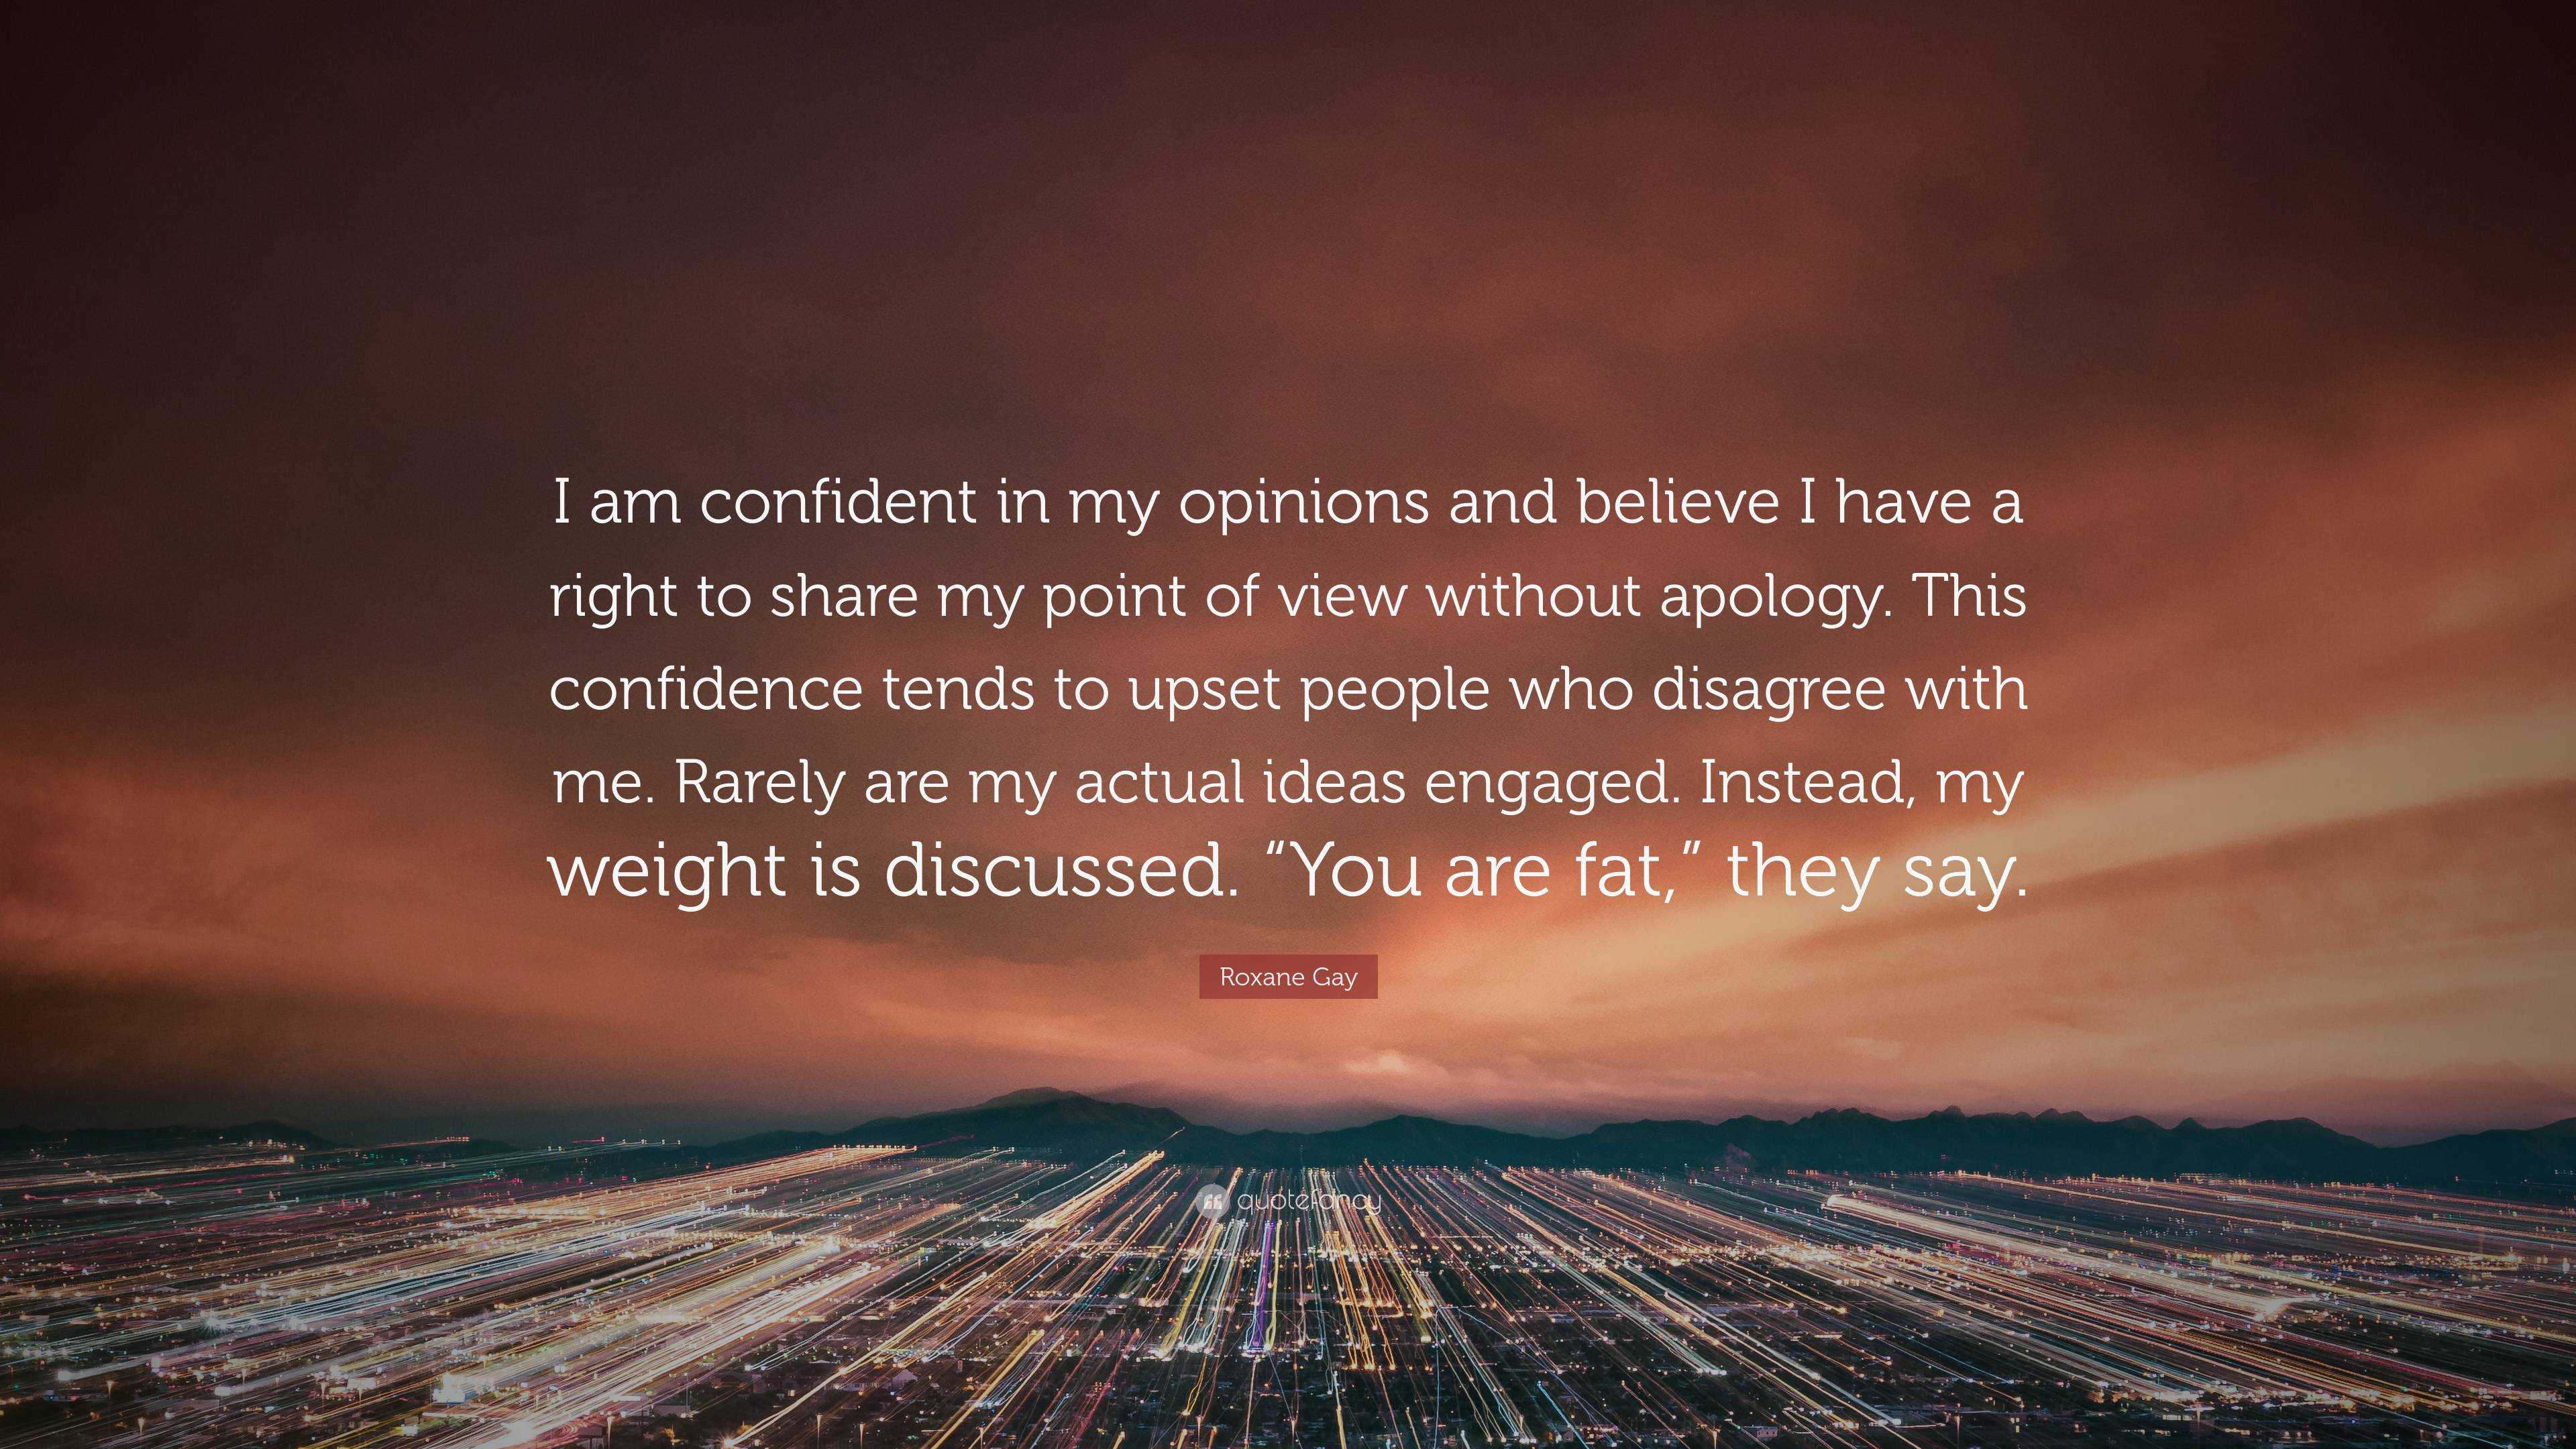 Roxane Gay Quote: “I am confident in my opinions and believe I have a right  to share my point of view without apology. This confidence tend...”